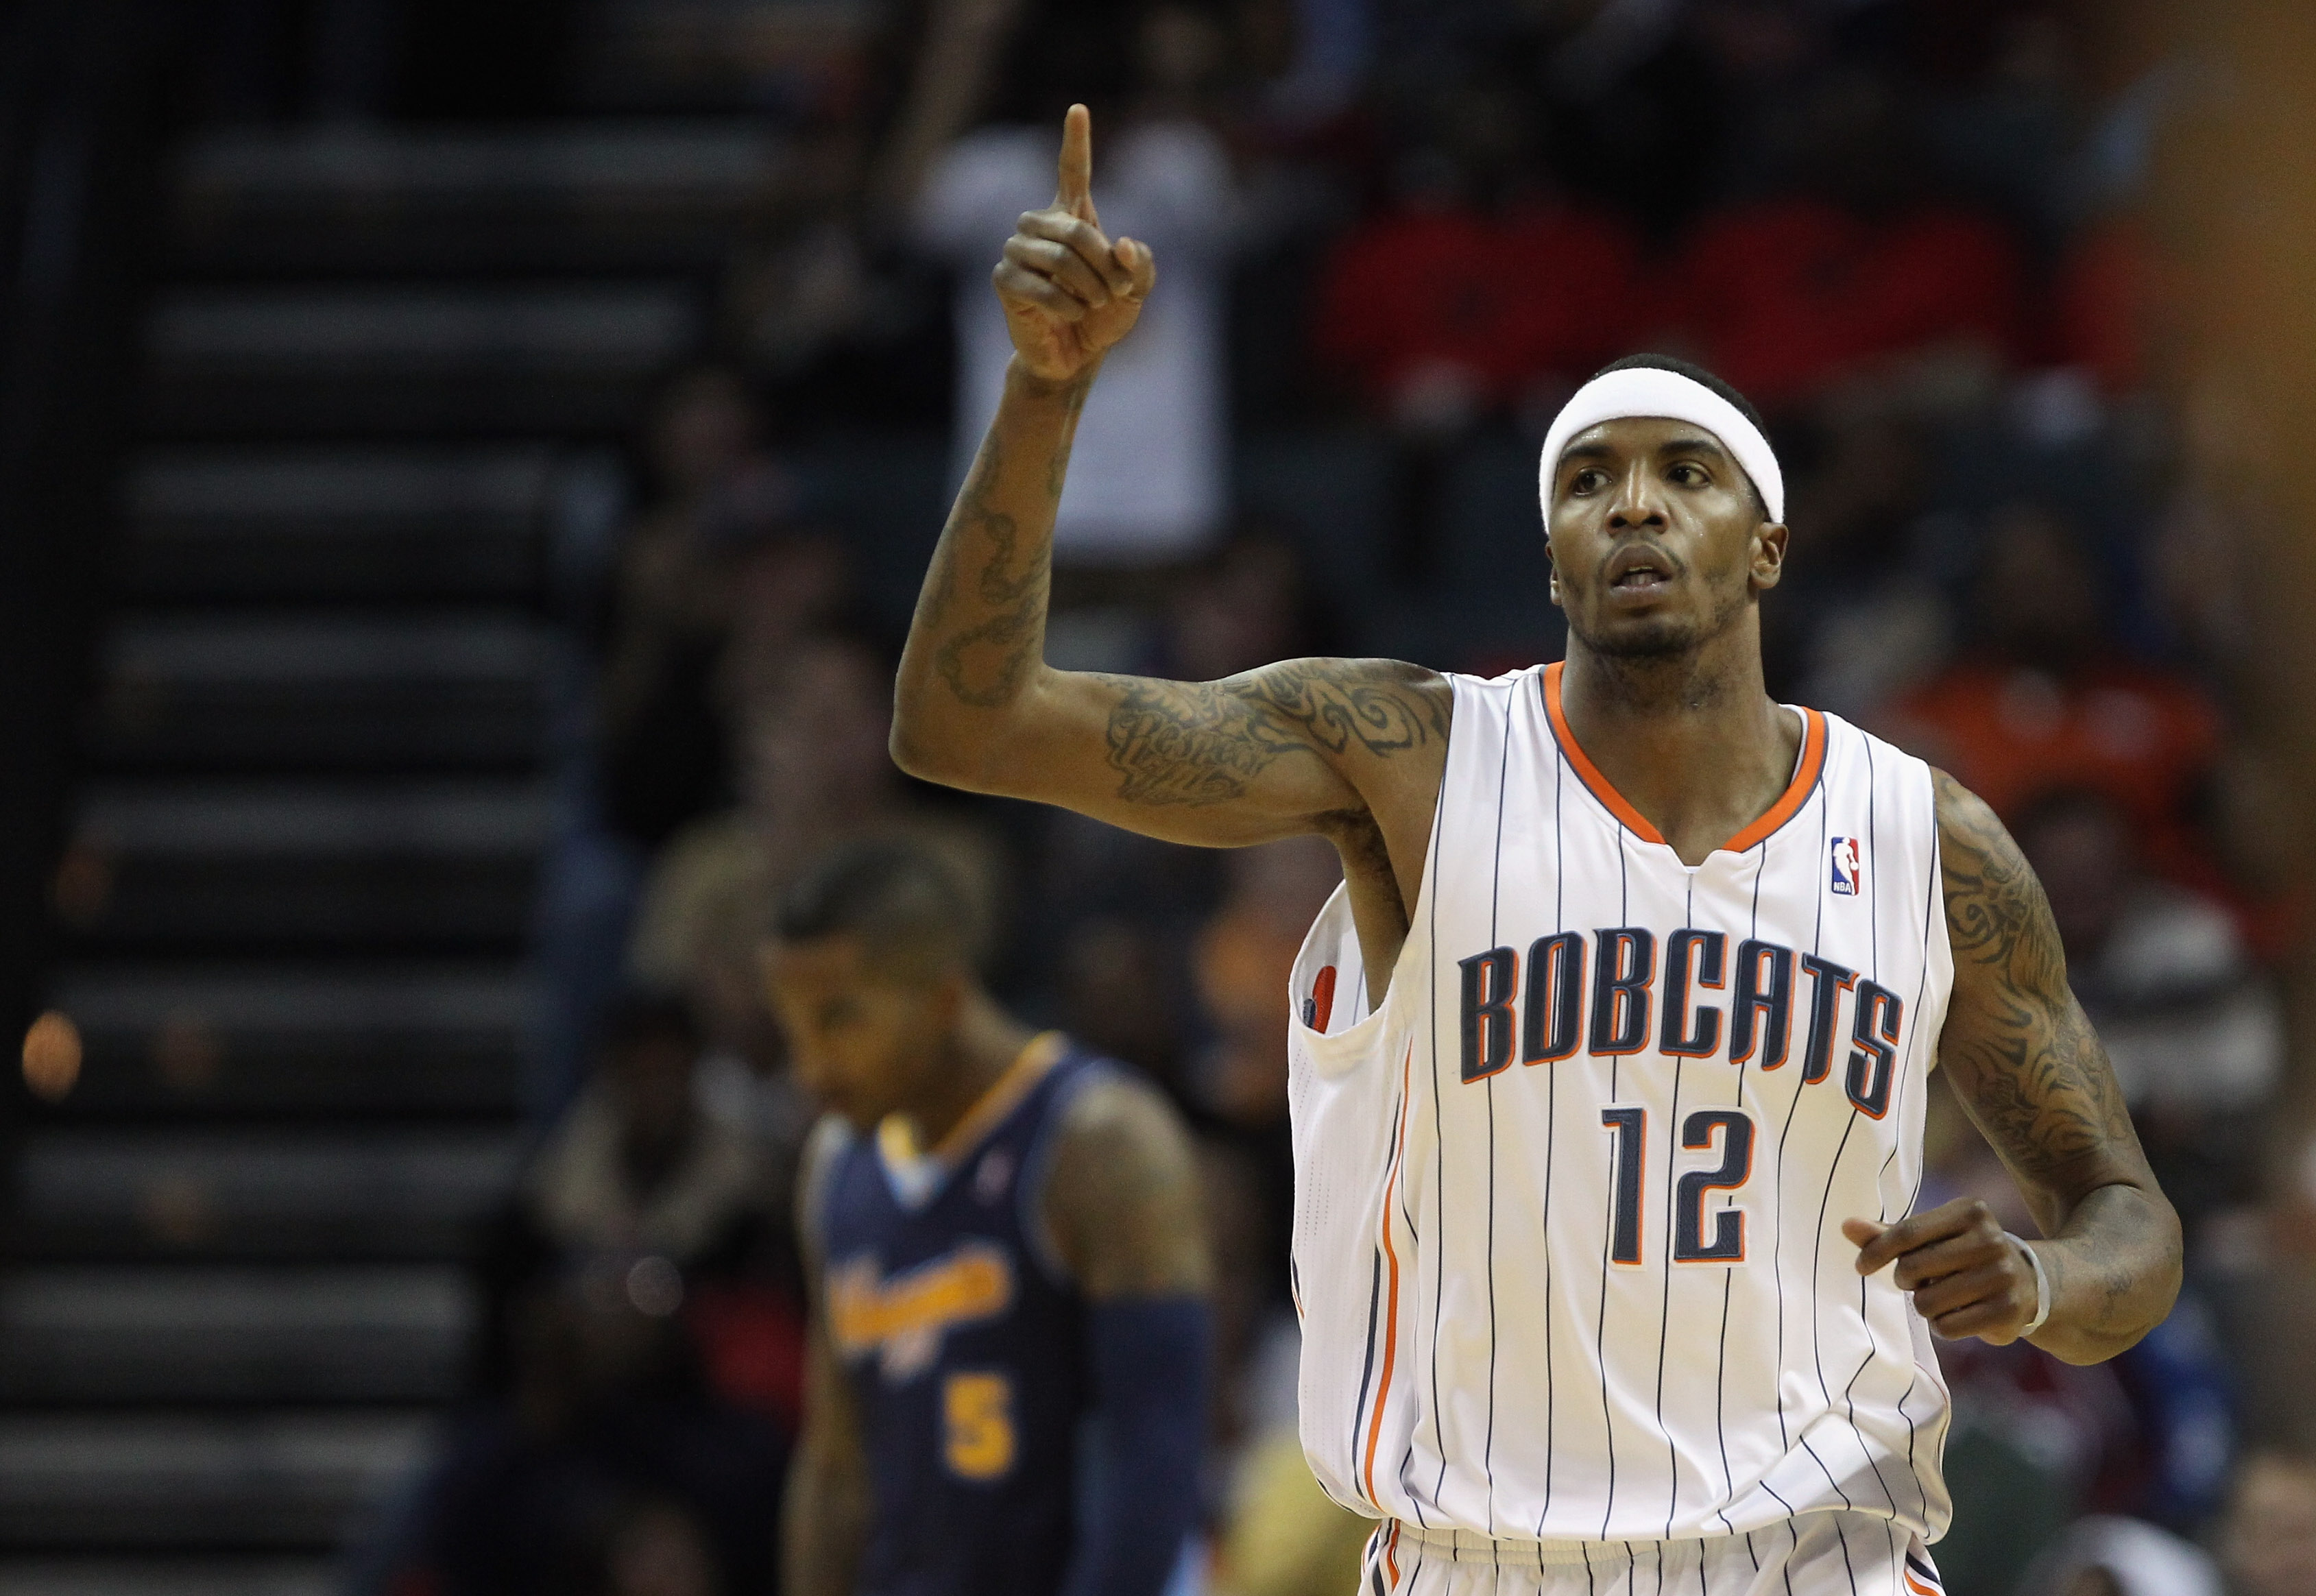 CHARLOTTE, NC - DECEMBER 07:  Tyrus Thomas #12 of the Charlotte Bobcats reacts to scoring against the Denver Nuggets during their game at Time Warner Cable Arena on December 7, 2010 in Charlotte, North Carolina.  NOTE TO USER: User expressly acknowledges